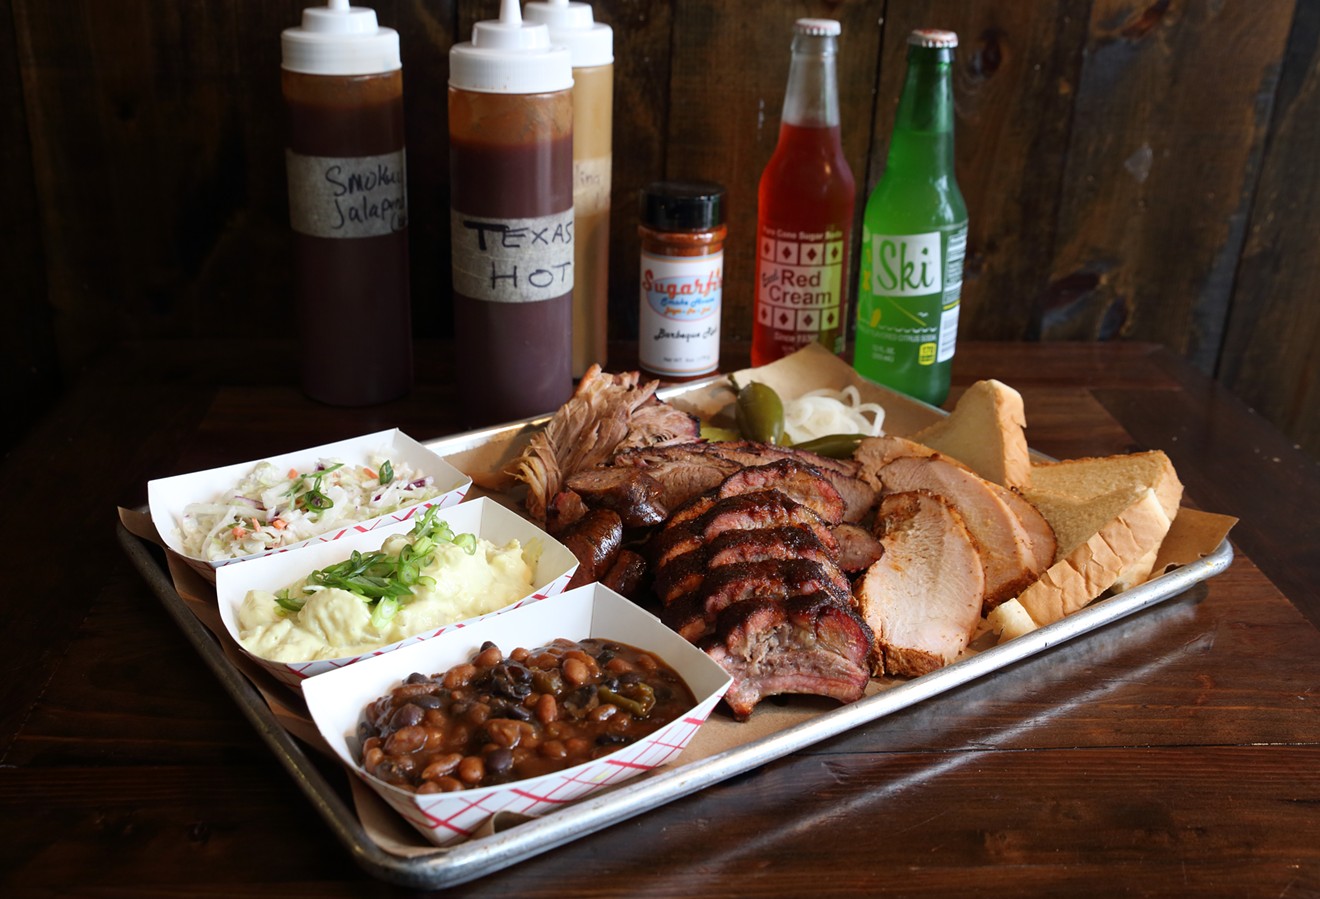 Sugarfire Smoke House promises a blend of the St. Louis barbecue with the Texas approach we all know and love.